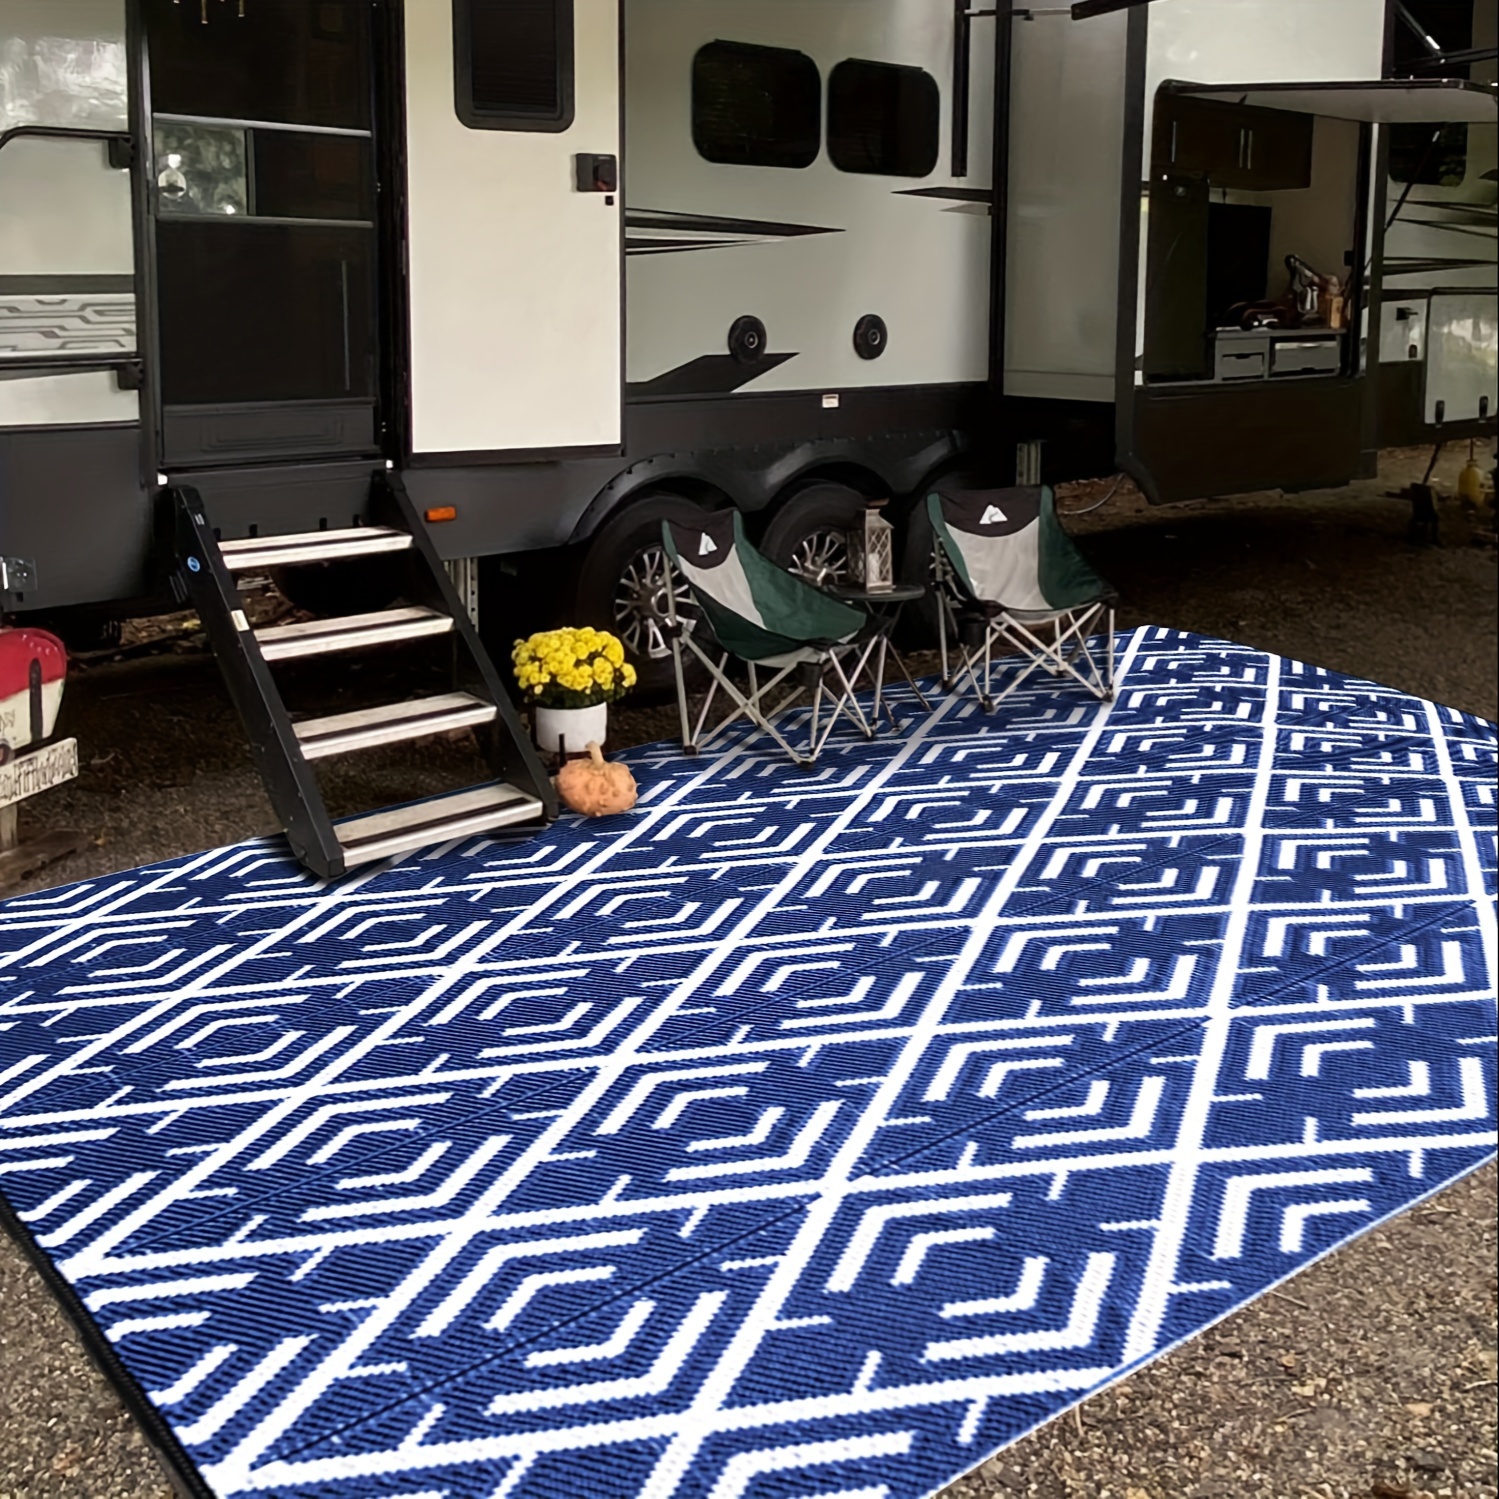 

Reversible Outdoor Rug, Blue And White Geometric Maze Pattern, 8x10ft, Lightweight And Foldable, With Carrier Bag And Rug Stakes, Ideal For Patio, Camping, And Garden Decor